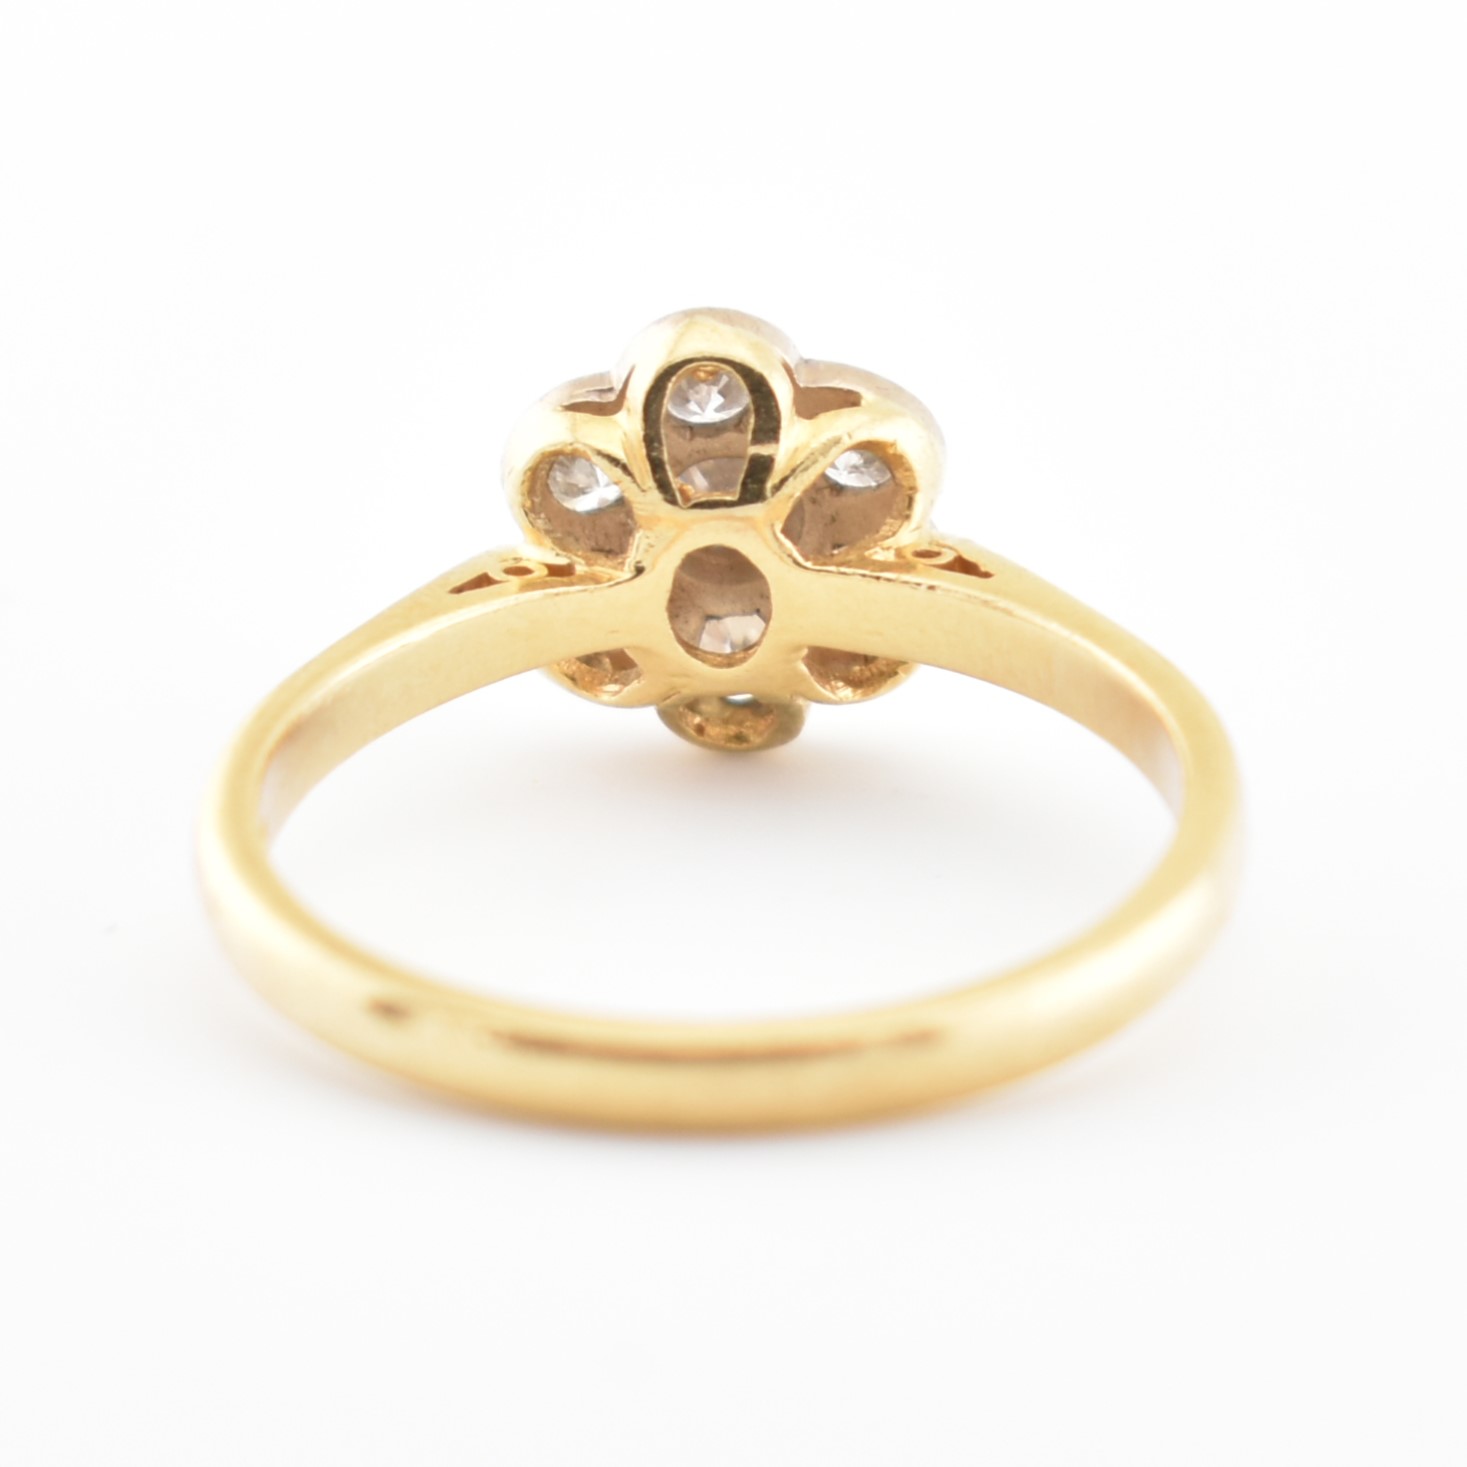 HALLMARKED 18CT GOLD & DIAMOND CLUSTER RING - Image 3 of 6